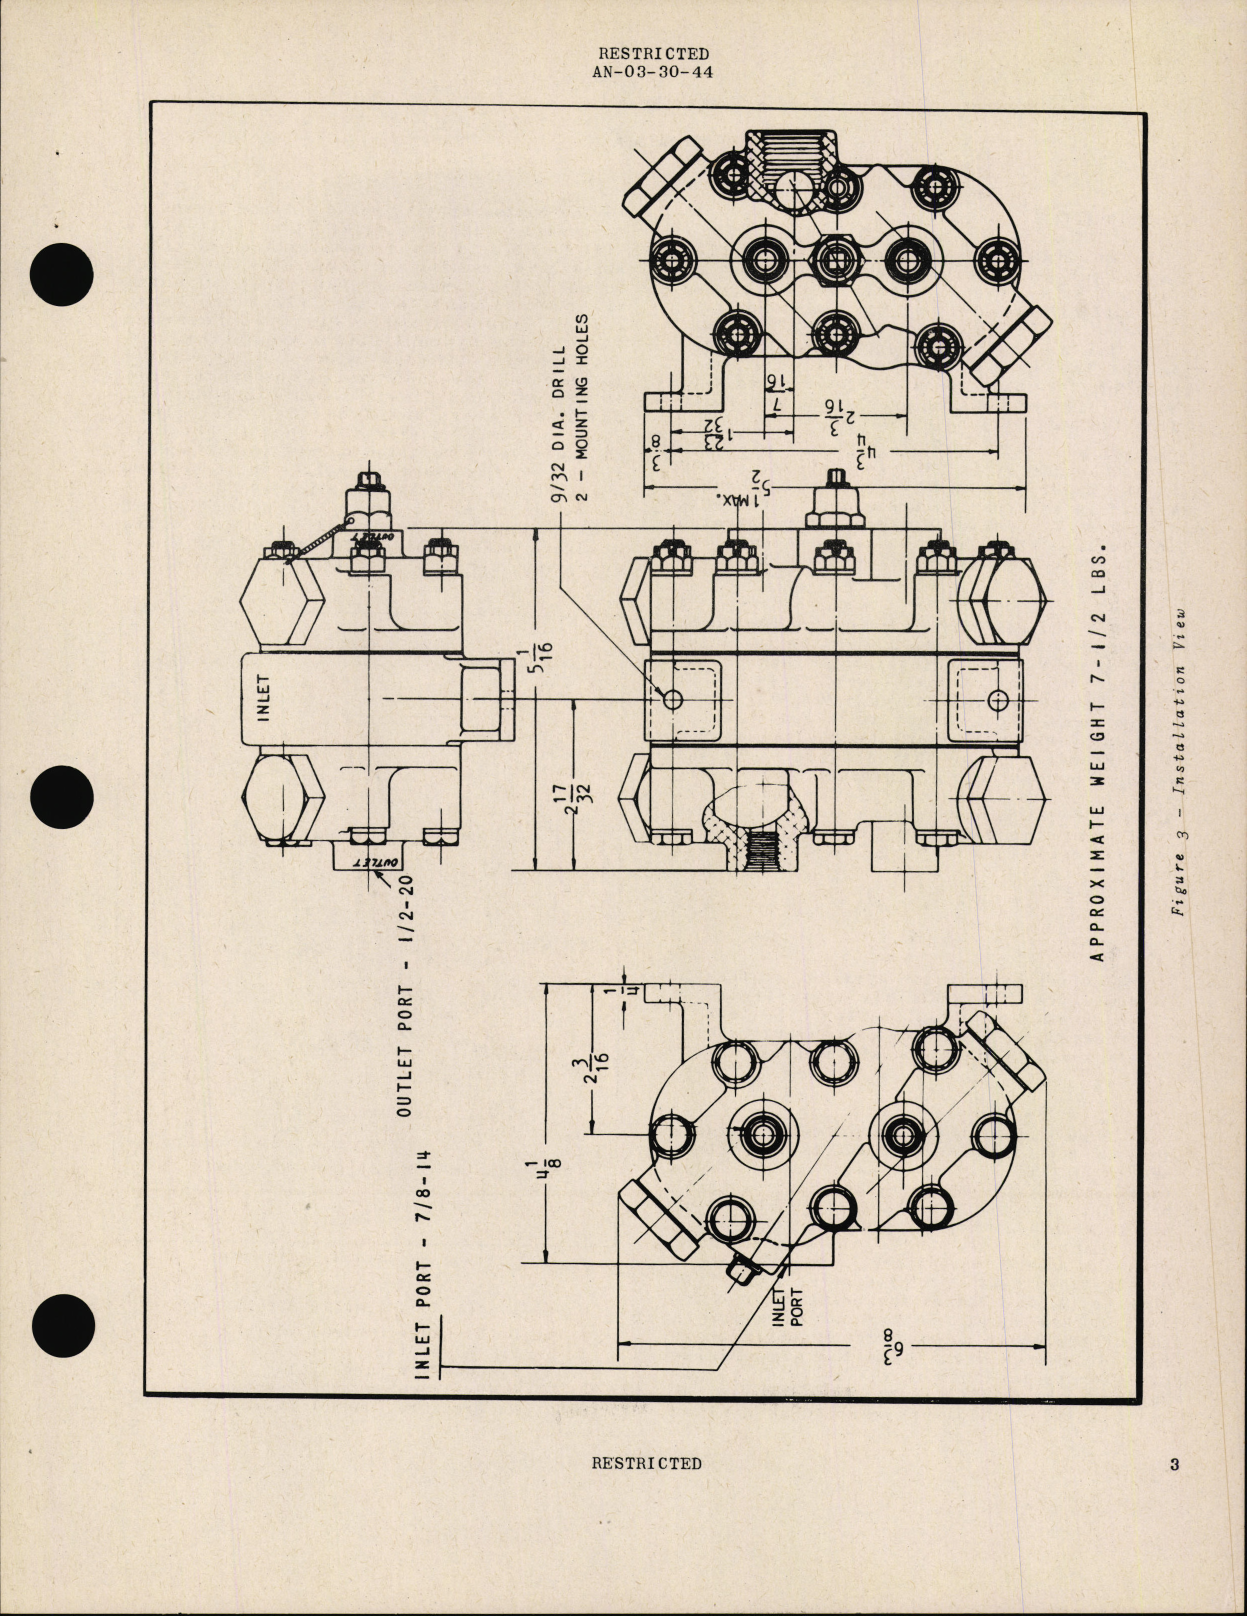 Sample page 7 from AirCorps Library document: Handbook of Instructions with Parts Catalog for Hydraulic Flow Equalizer Model 1D-636-A